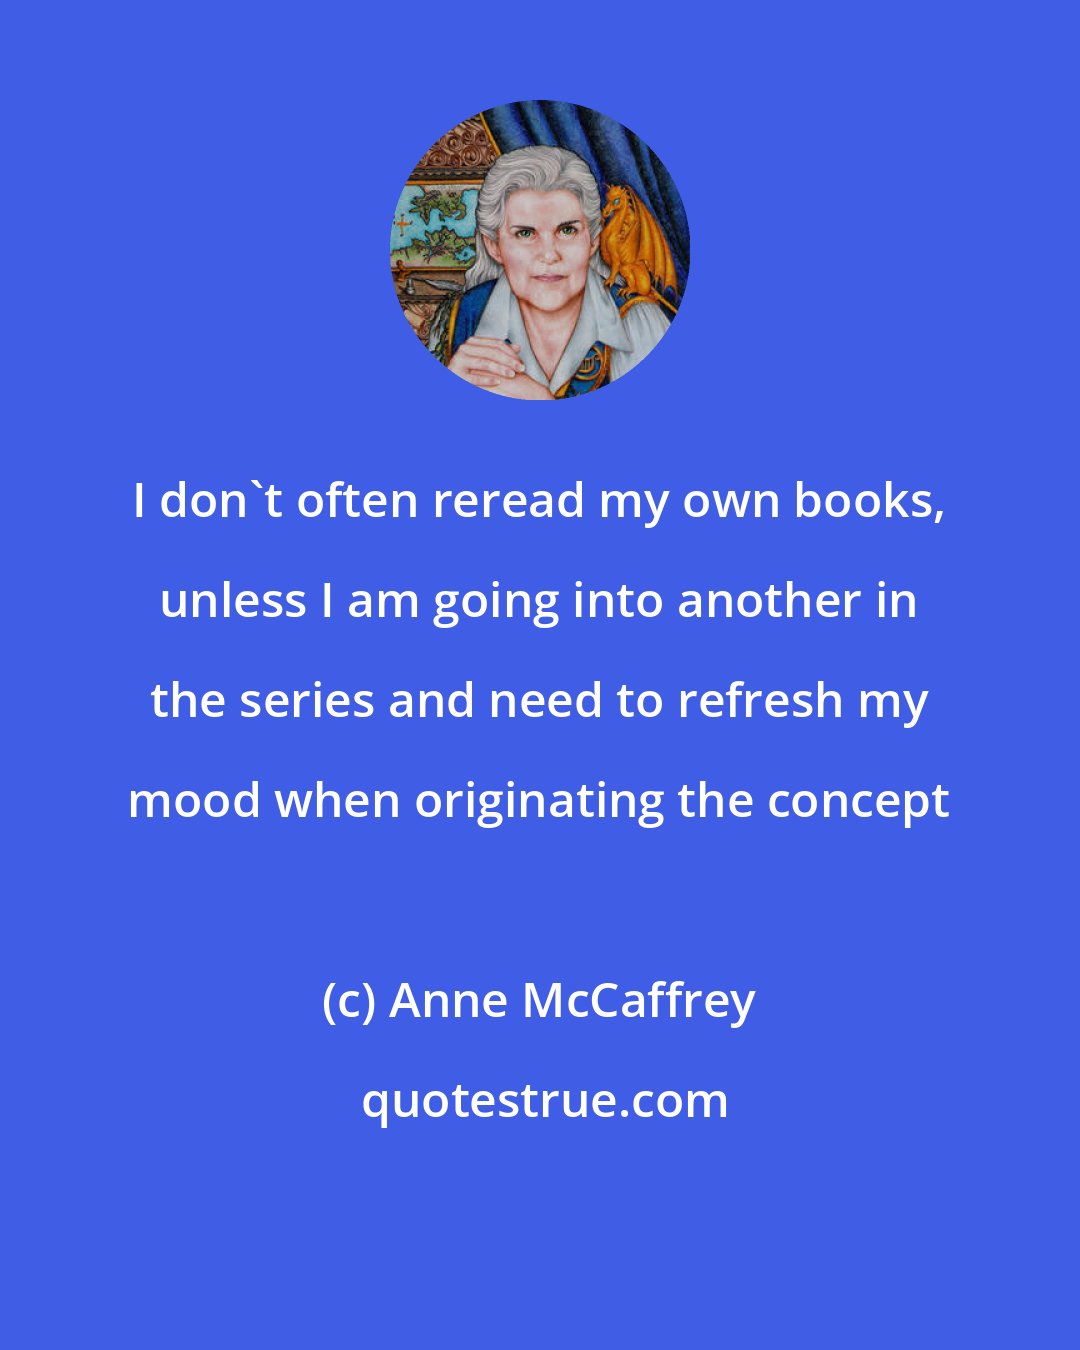 Anne McCaffrey: I don't often reread my own books, unless I am going into another in the series and need to refresh my mood when originating the concept